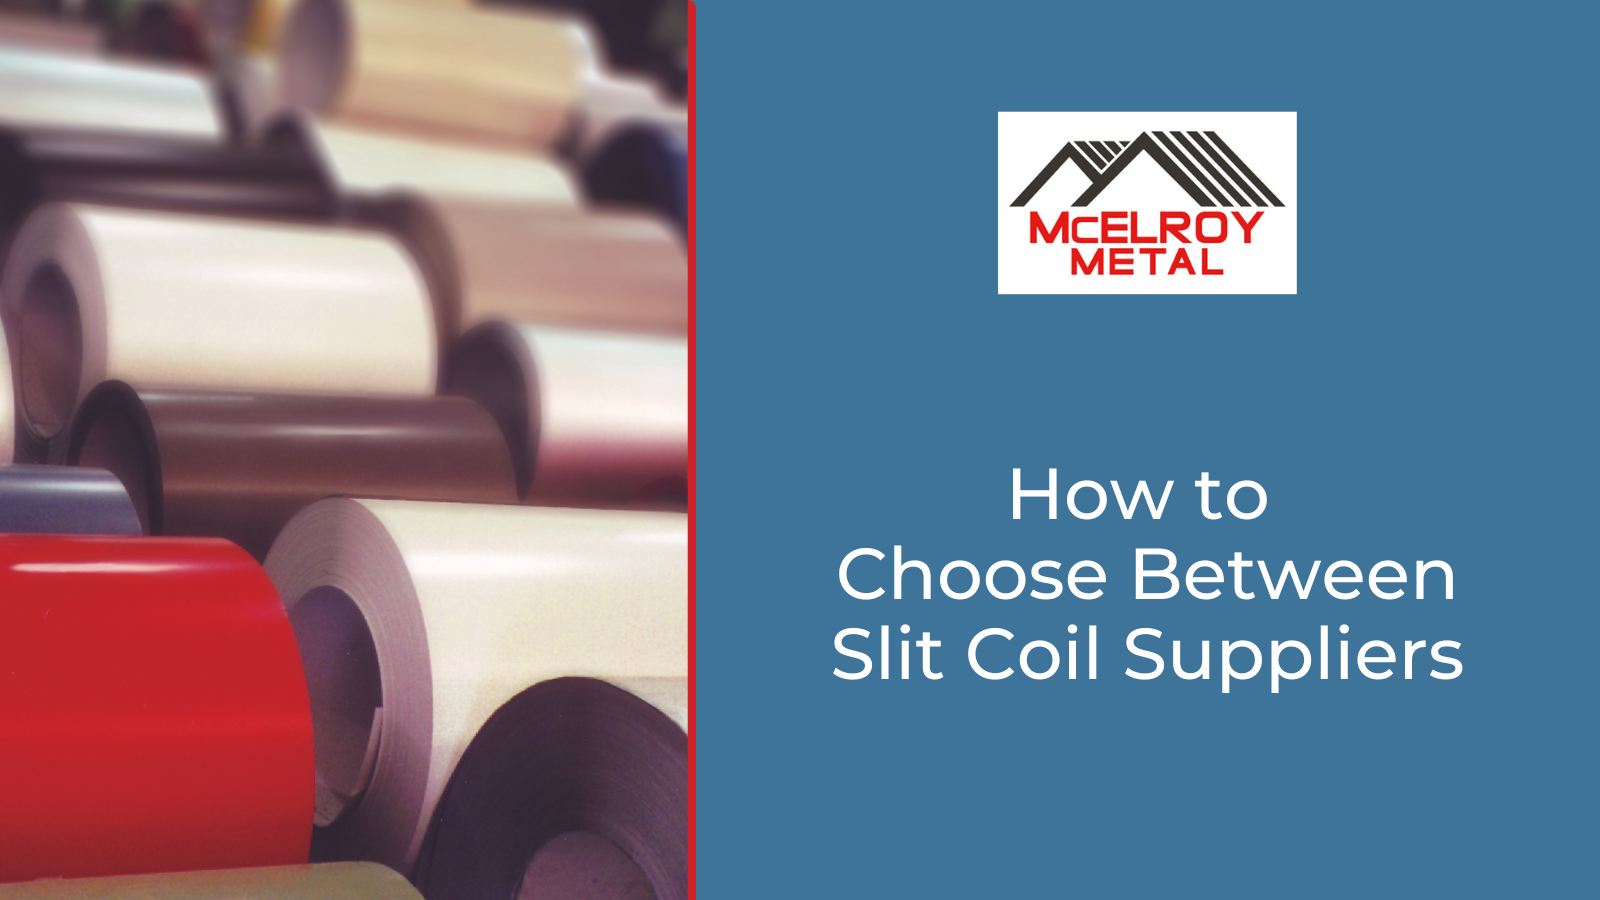 How to Choose Between Slit Coil Suppliers